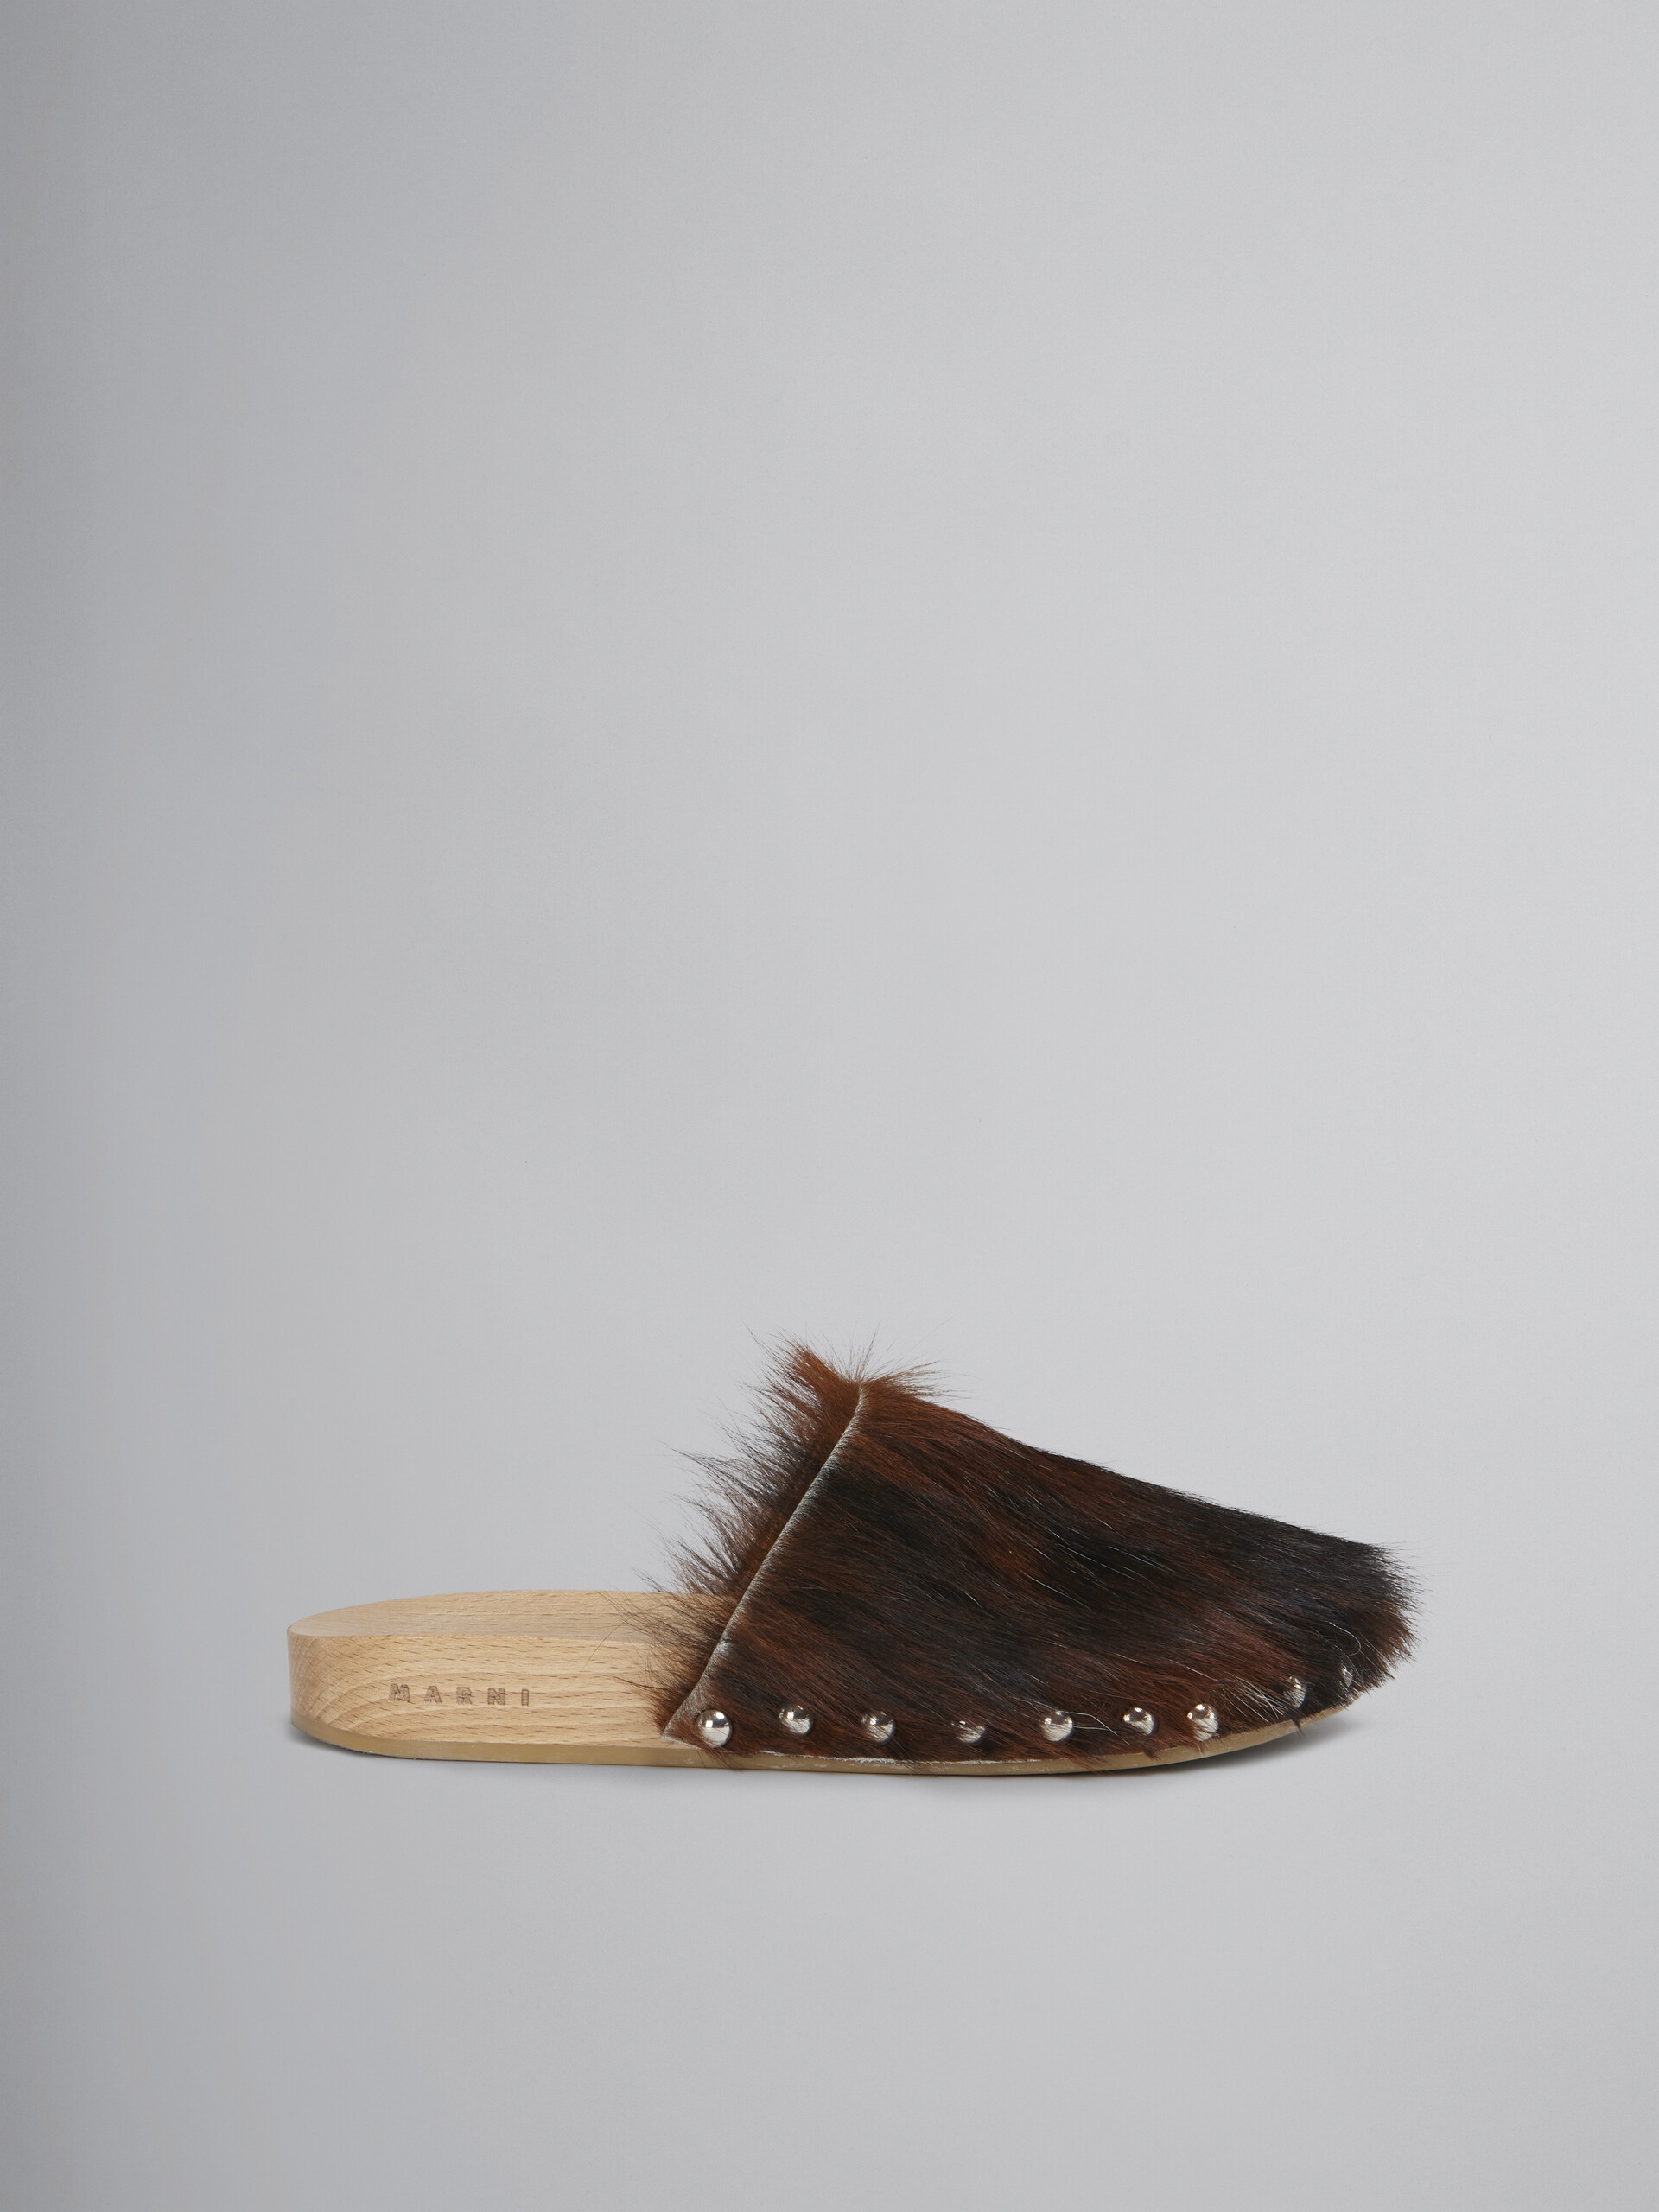 Spotted long calf hair wood sabot - Clogs - Image 1